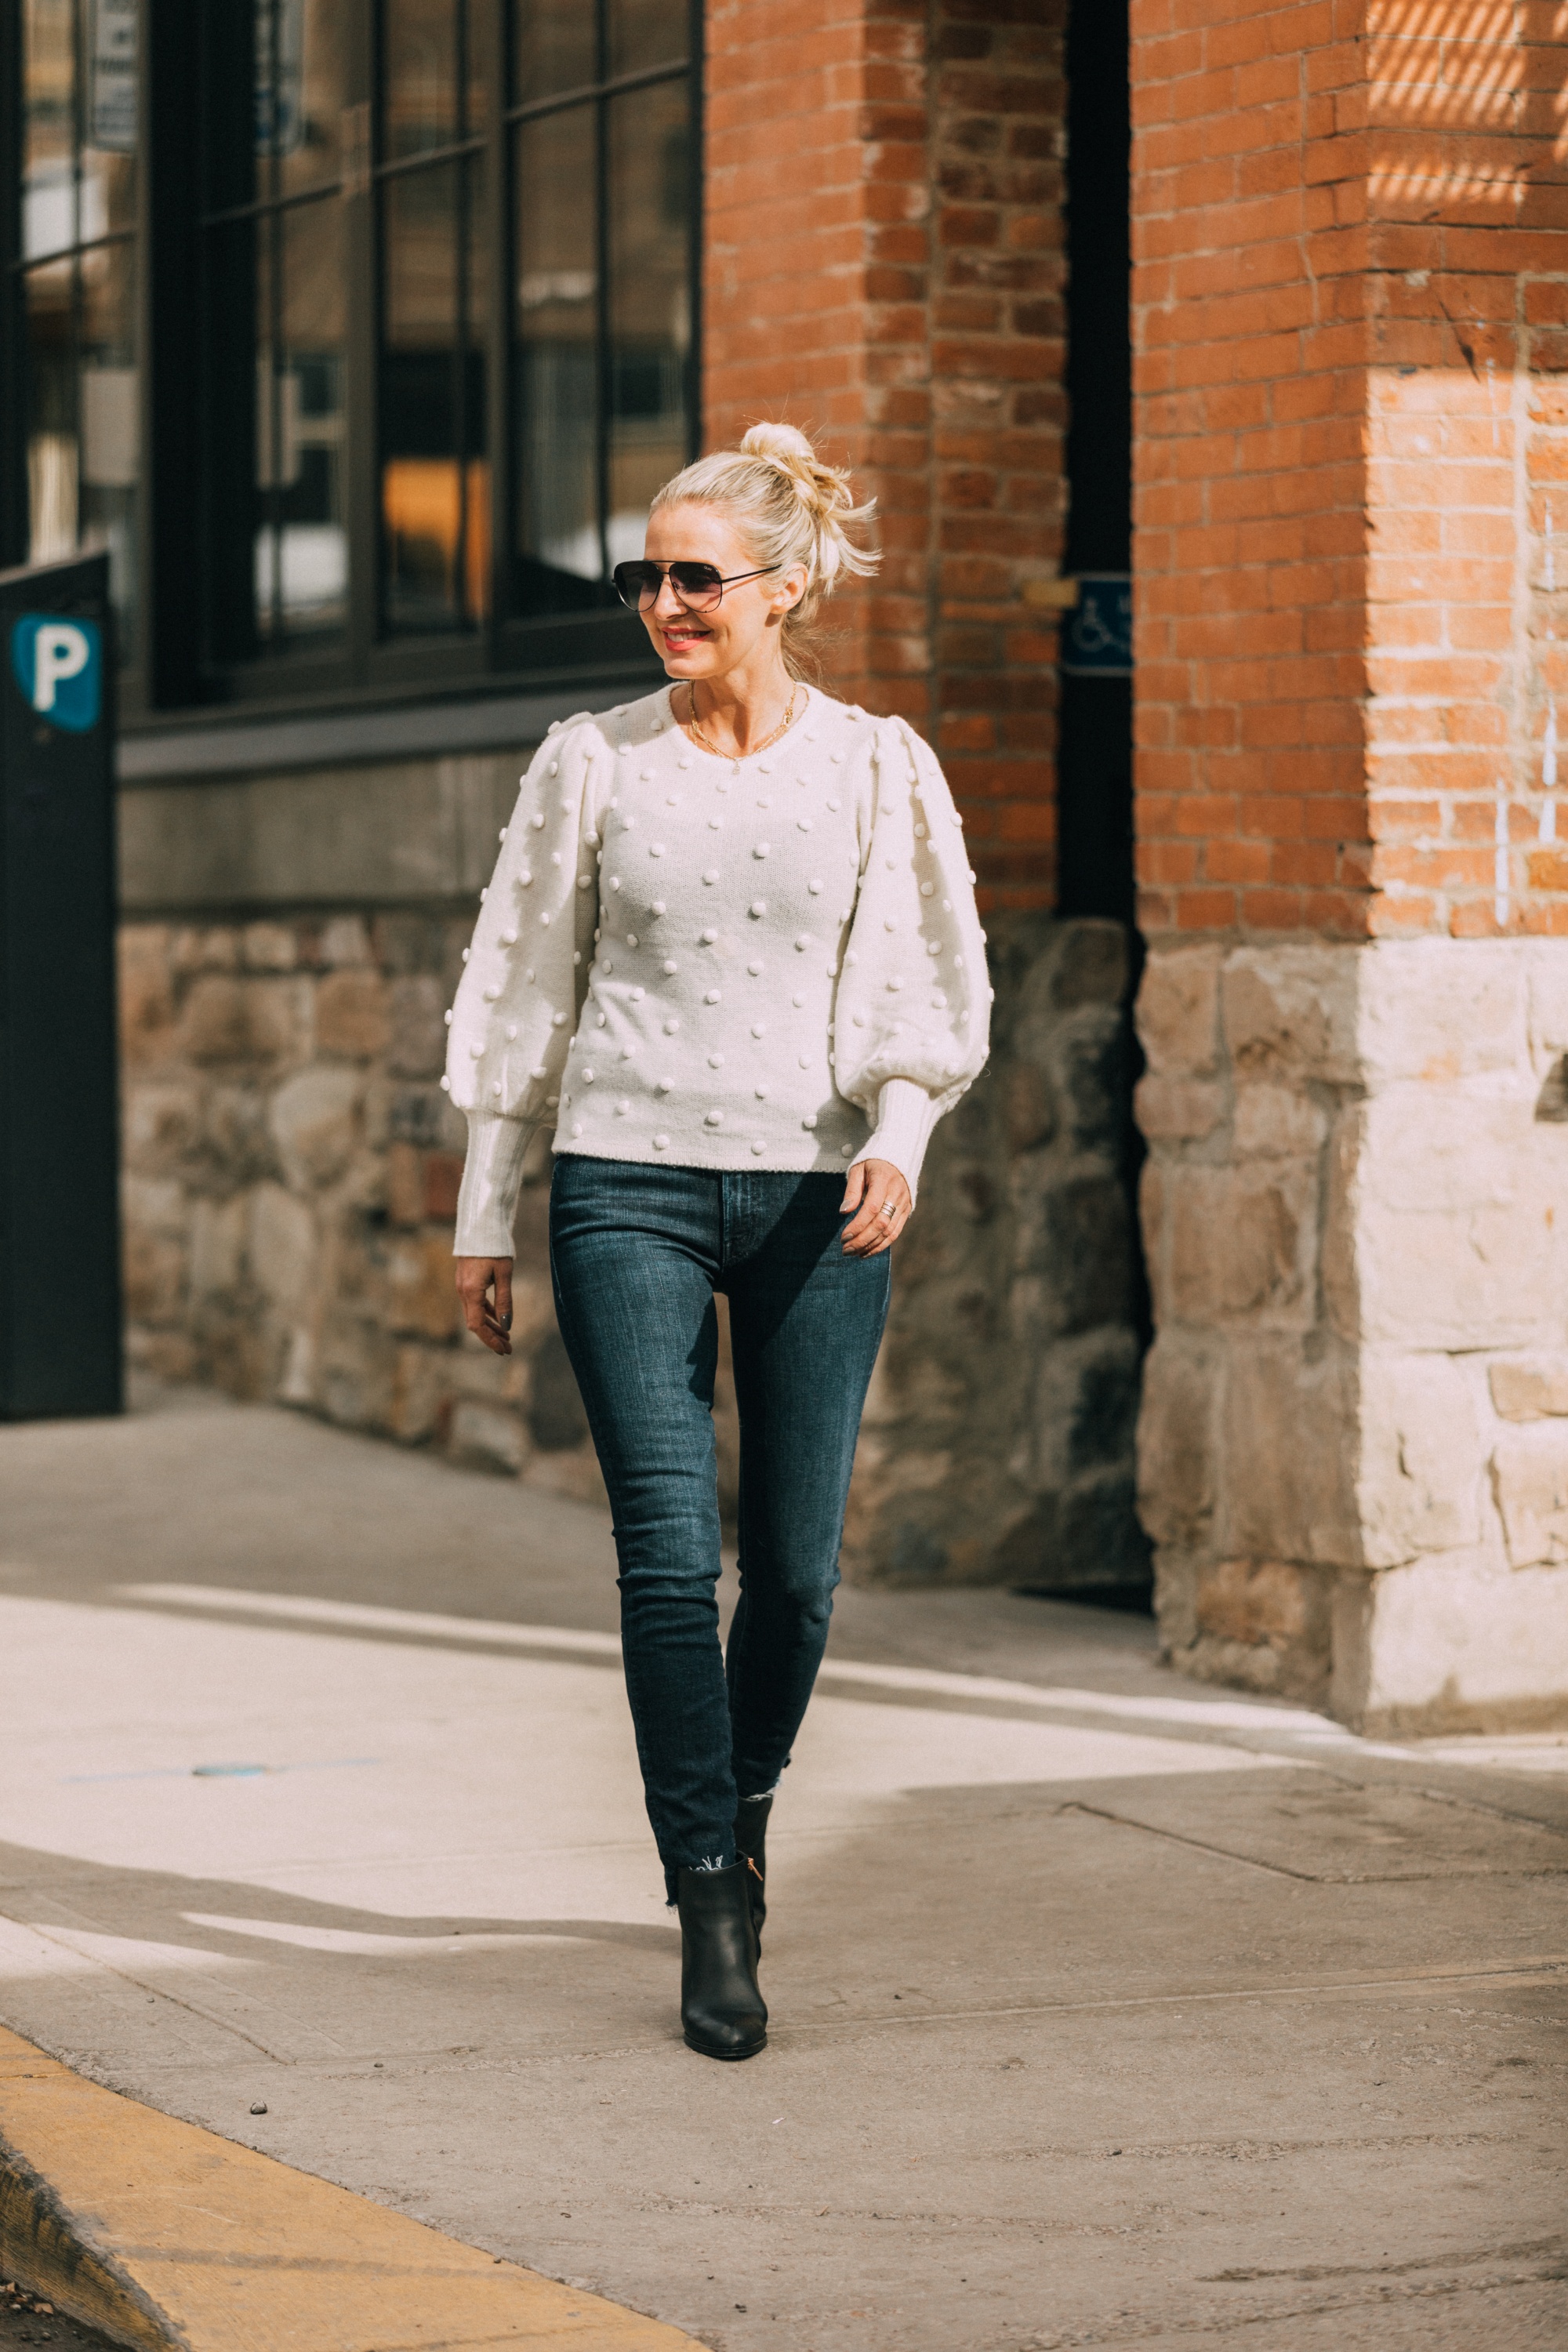 Cashmere Gifts Guide, Fashion blogger Erin Busbee of BusbeeStyle.com wearing a white balloon sleeve pom pom sweater by AQUA Cashmere with dark wash skinny jeans by rag & bone with black cutout rose gold booties by Alexander Wang from Bloomingdale's in Telluride, CO